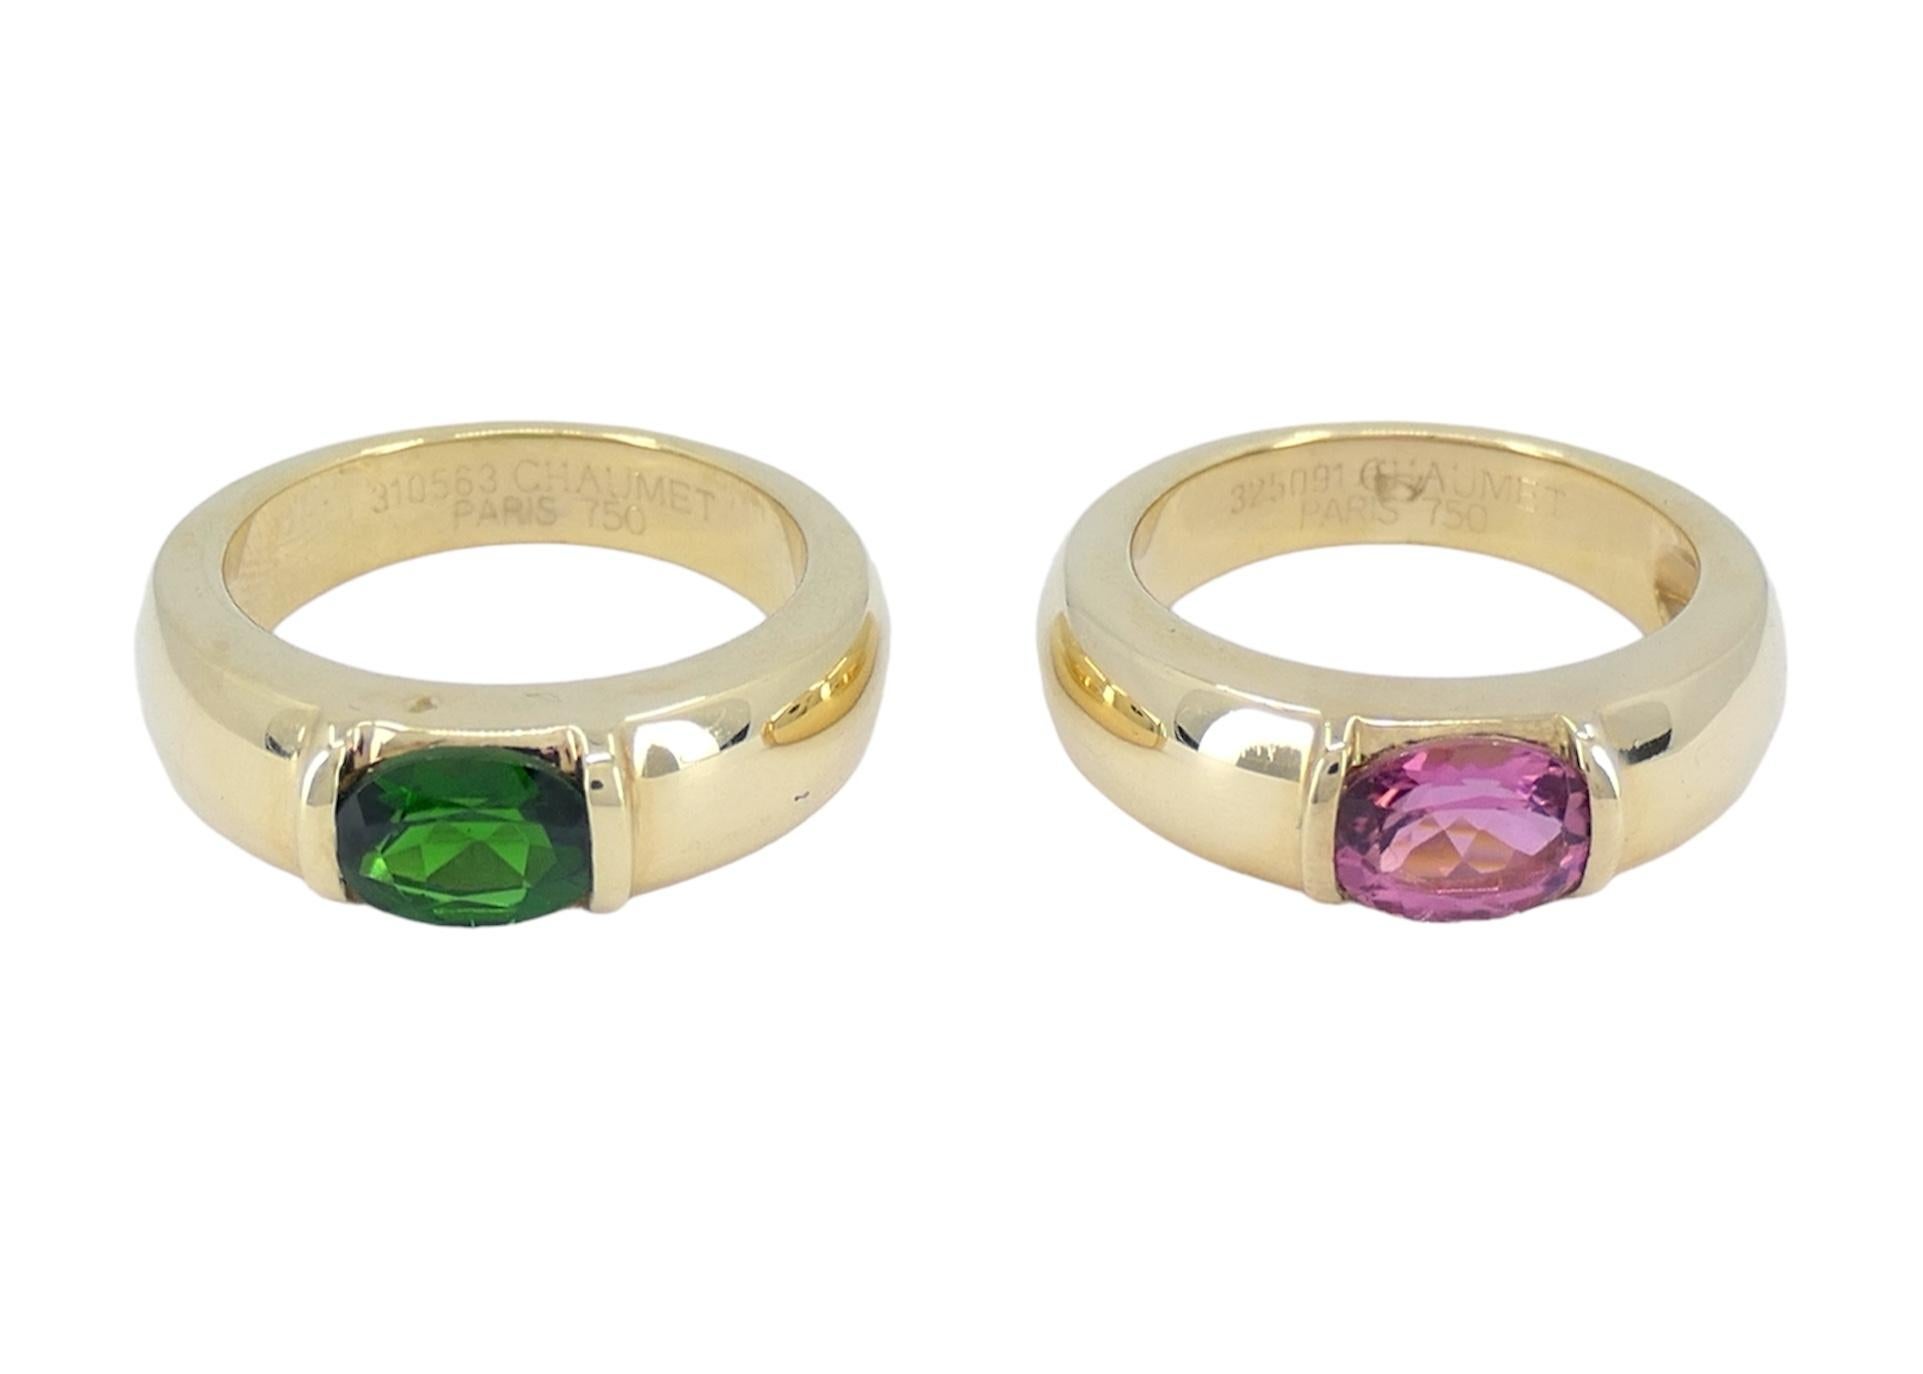 A pair of Chaumet Paris Pink and Green Troumaline 18k Gold Rings.
The green tourmaline ring is size 7.5, weighing 10.3 grams, signed 310563 Chaumet Paris 750.
The pink tourmaline ring is size 7, weighing 9.8 grams, signed 325091 Chaumet Paris 750.